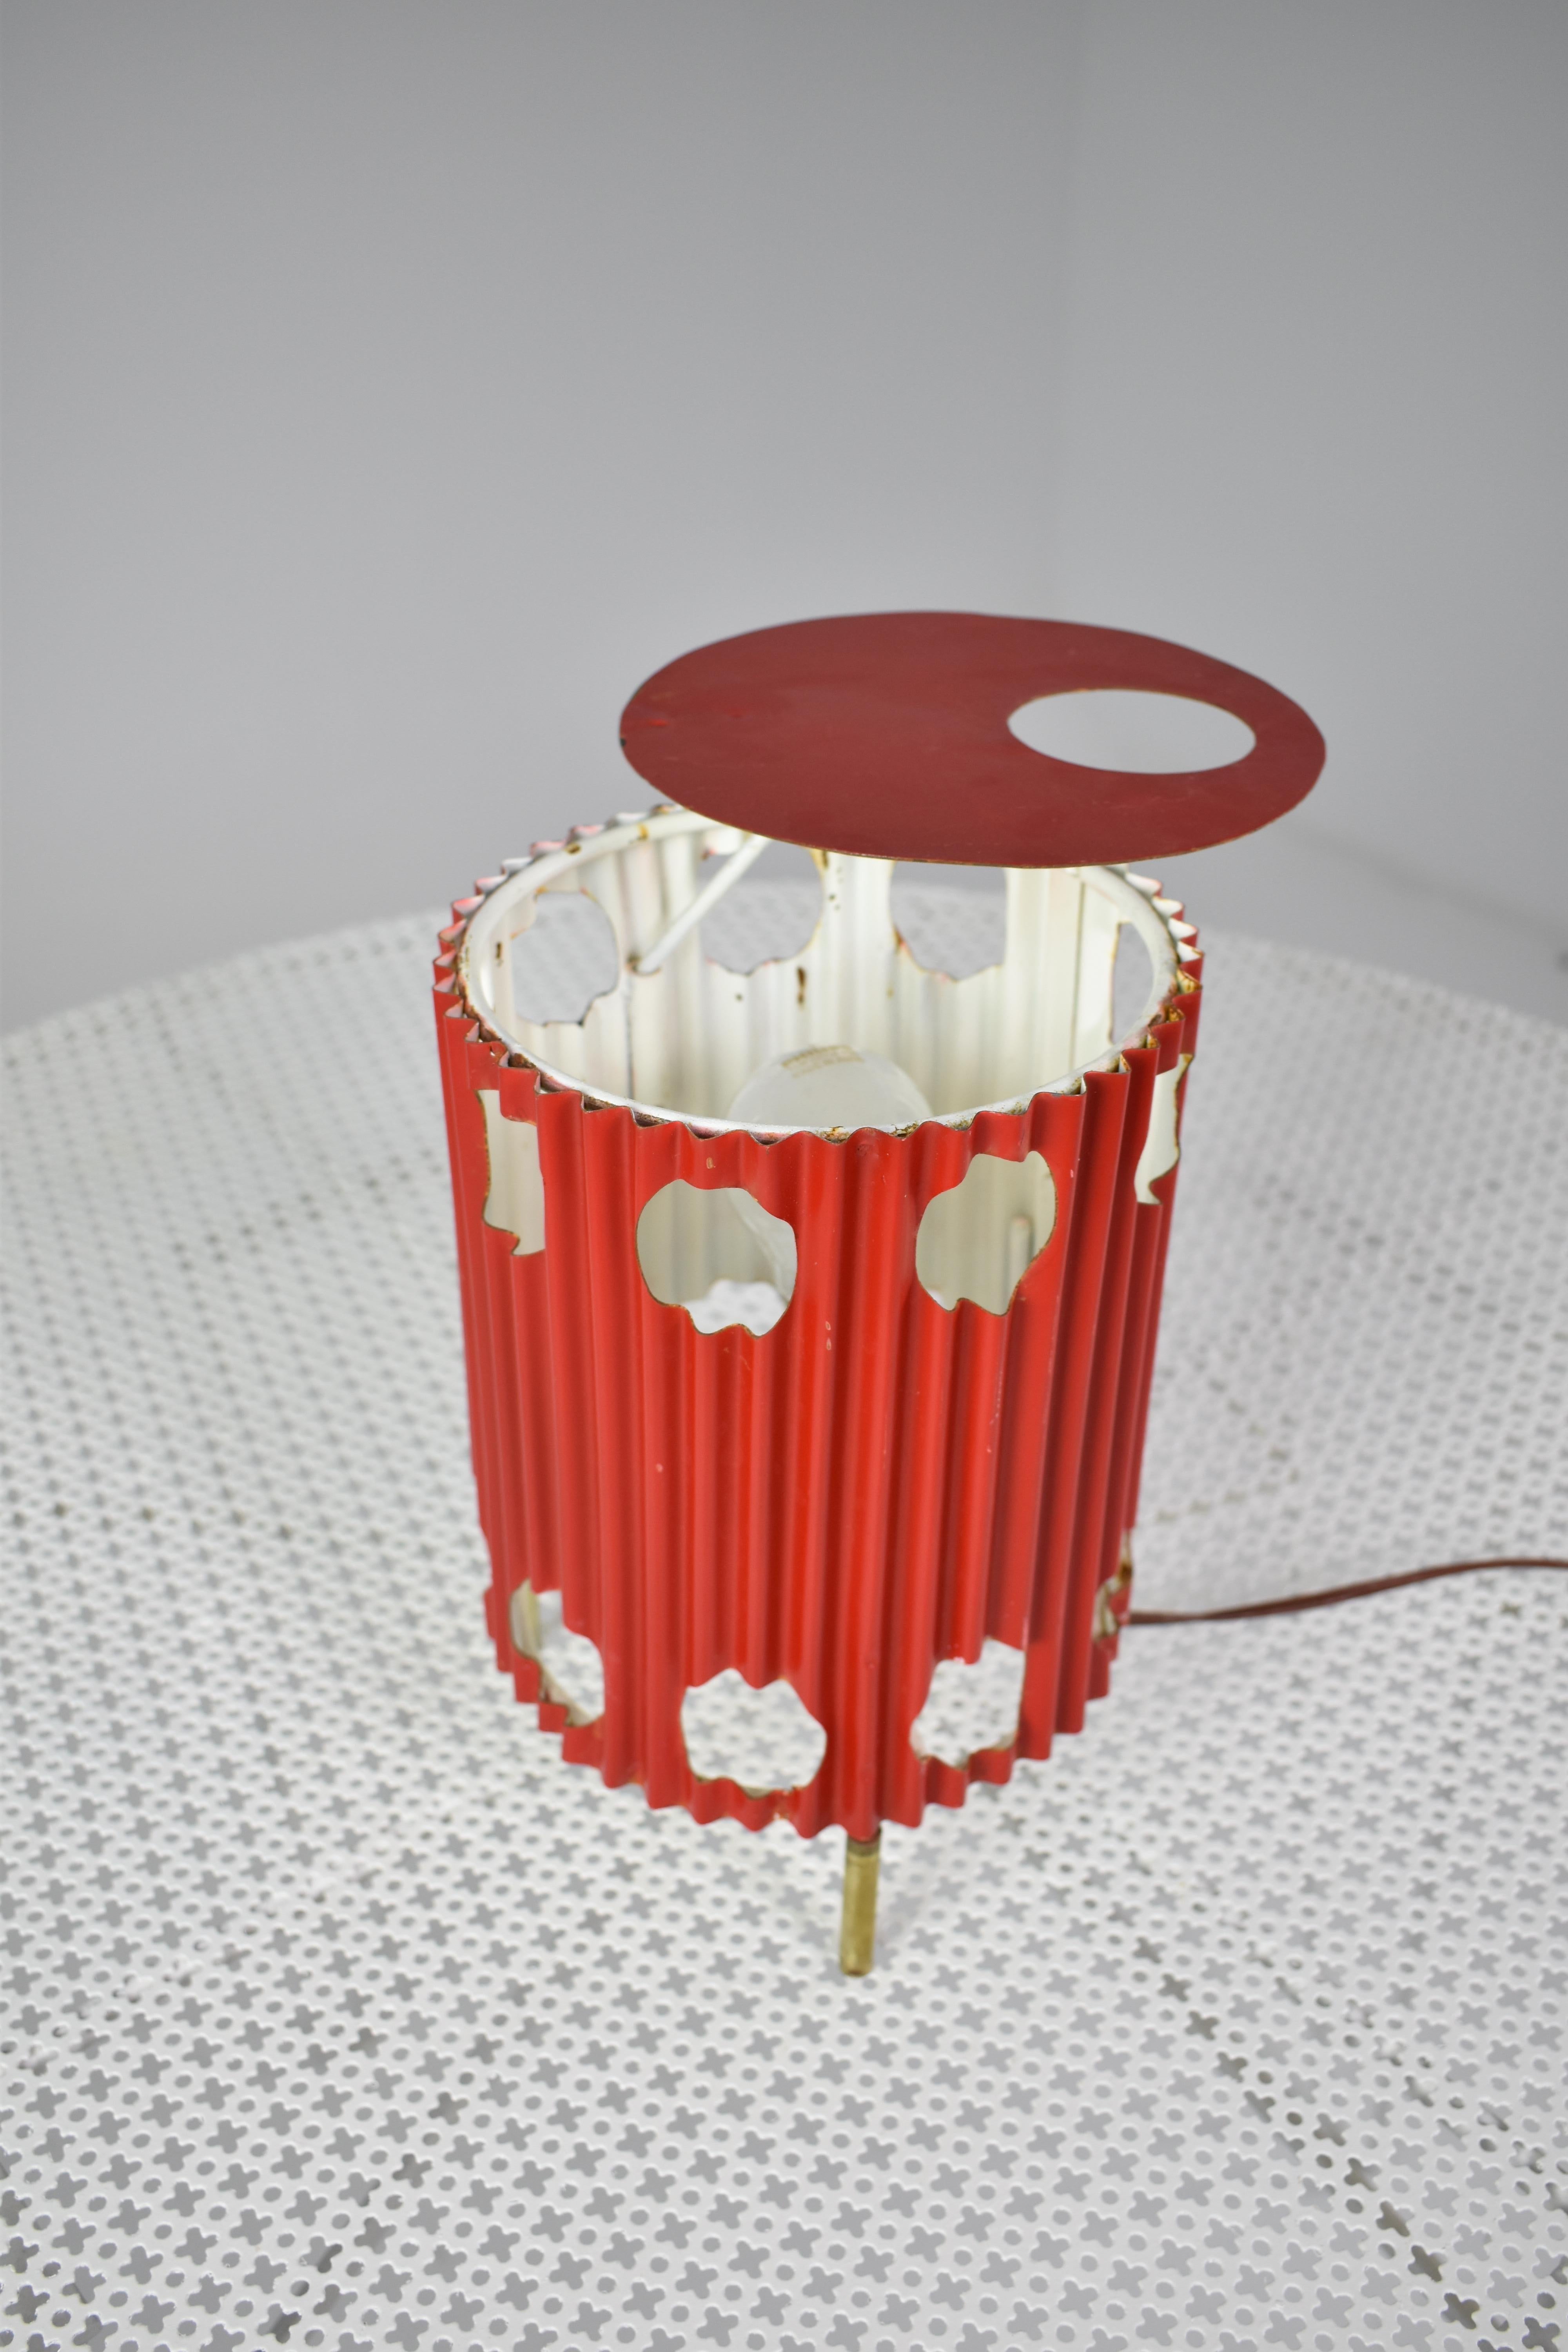 The highly collectible red 'Java' lamp, circa 1953, embodies Mathieu Matégot's artistic innovation, featuring pleated and perforated painted sheeted metal atop elegant brass tripod legs. Like a work of art, its striking design plays with light and